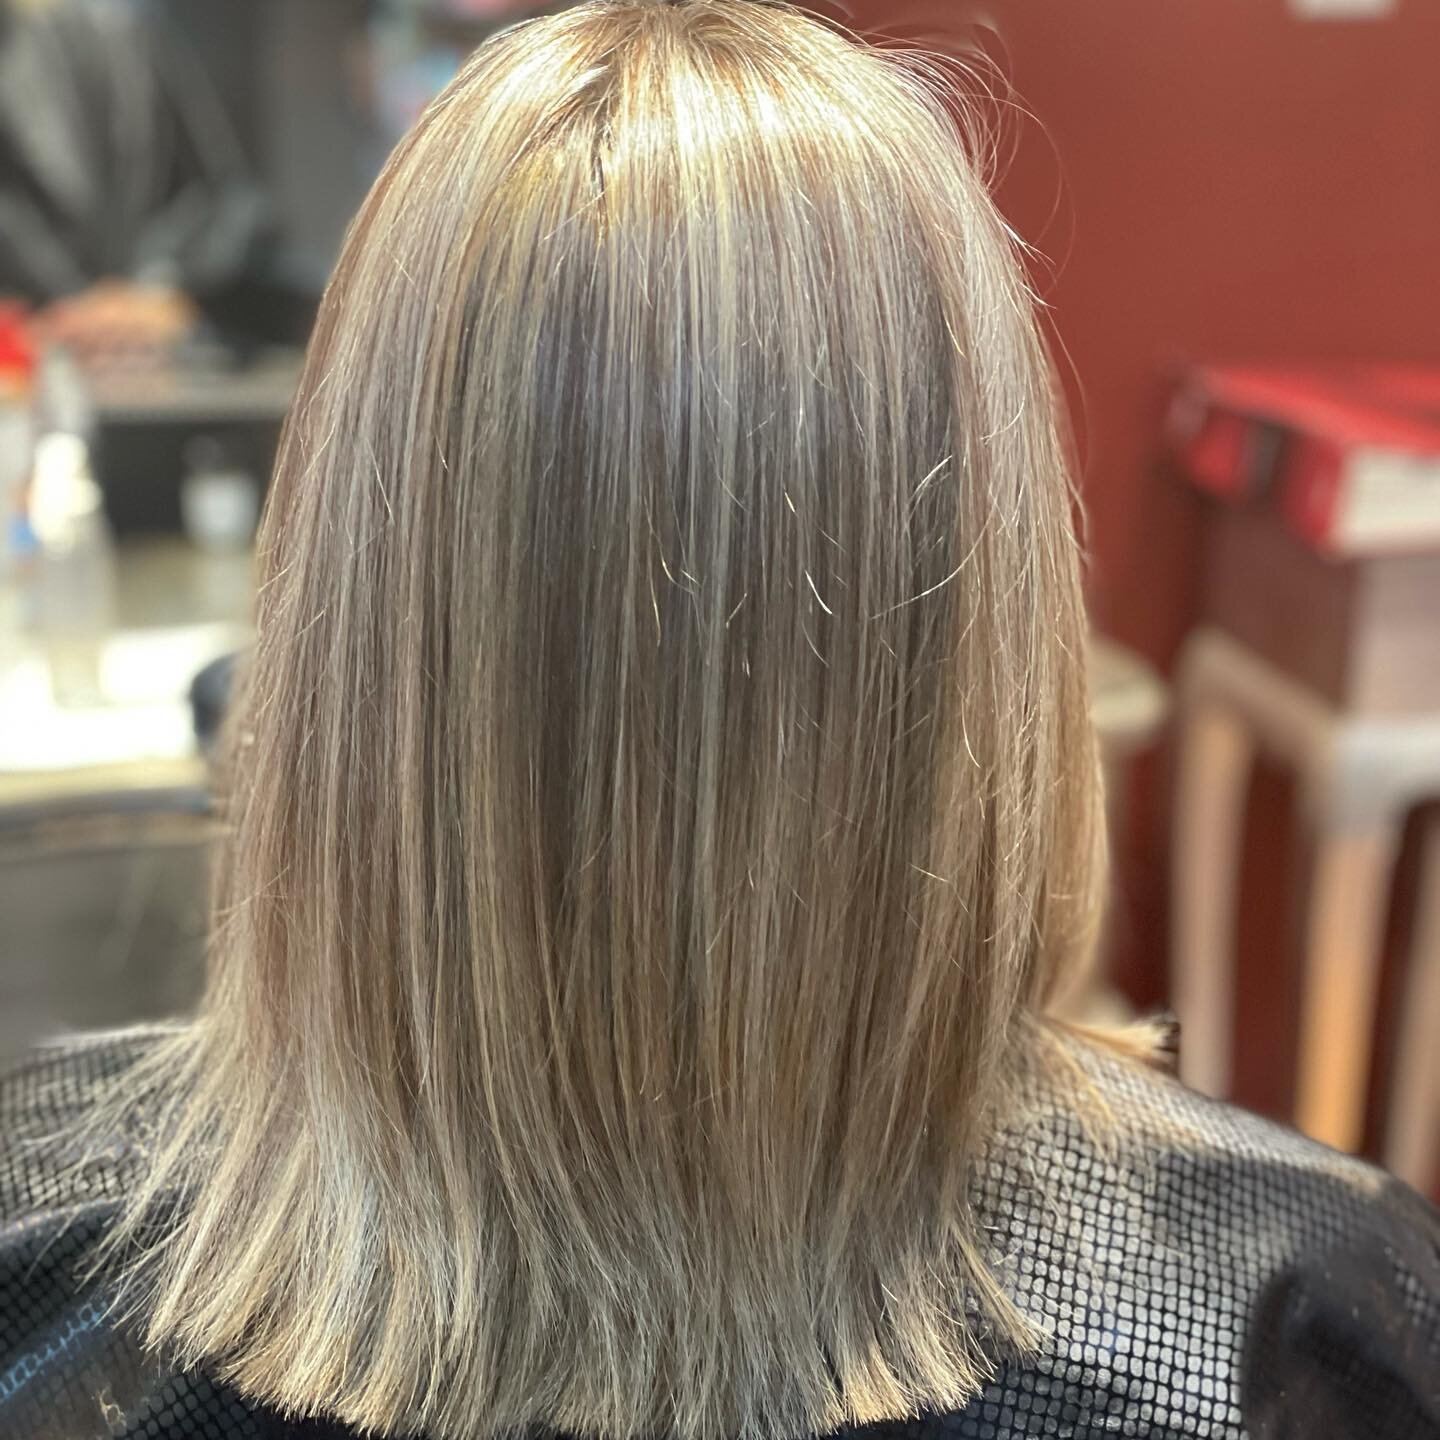 Tired of the 4-6 week touch up? Want a more natural look? We suggest adding baby highlights &amp; lowlights to for less up keep on your touch ups! 💇🏼&zwj;♀️
.
Hairstylist: Lucy
.
.
.
.
#lexsalon #phoenixvillehair #phoenixville #phoenixvillepa #baby